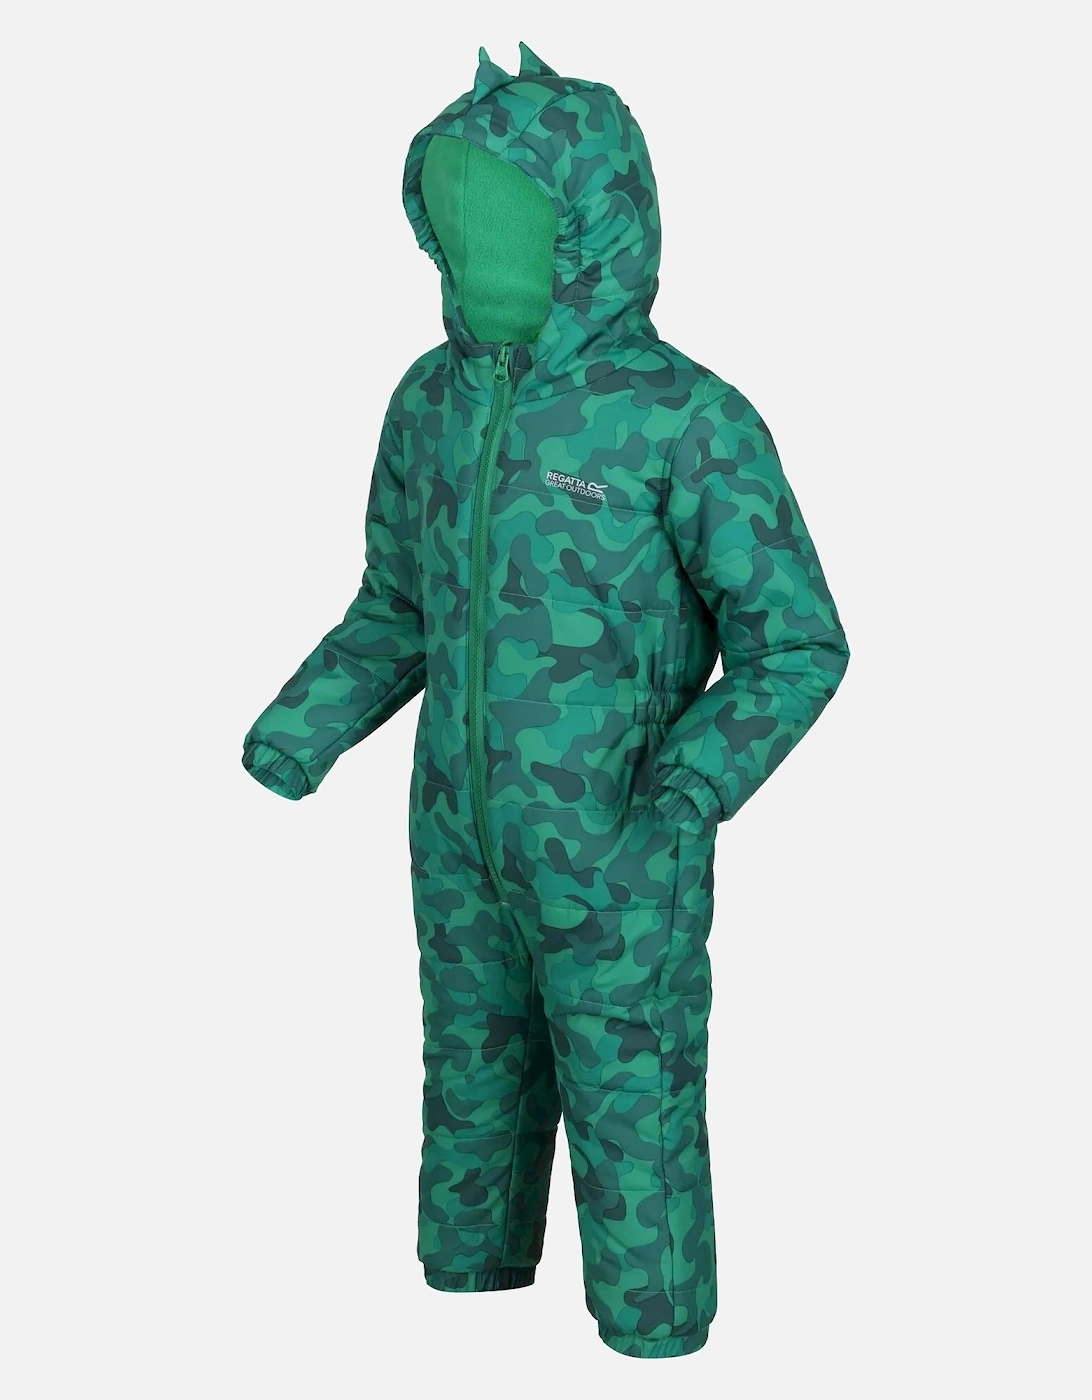 Childrens/Kids Penrose Camo Puddle Suit